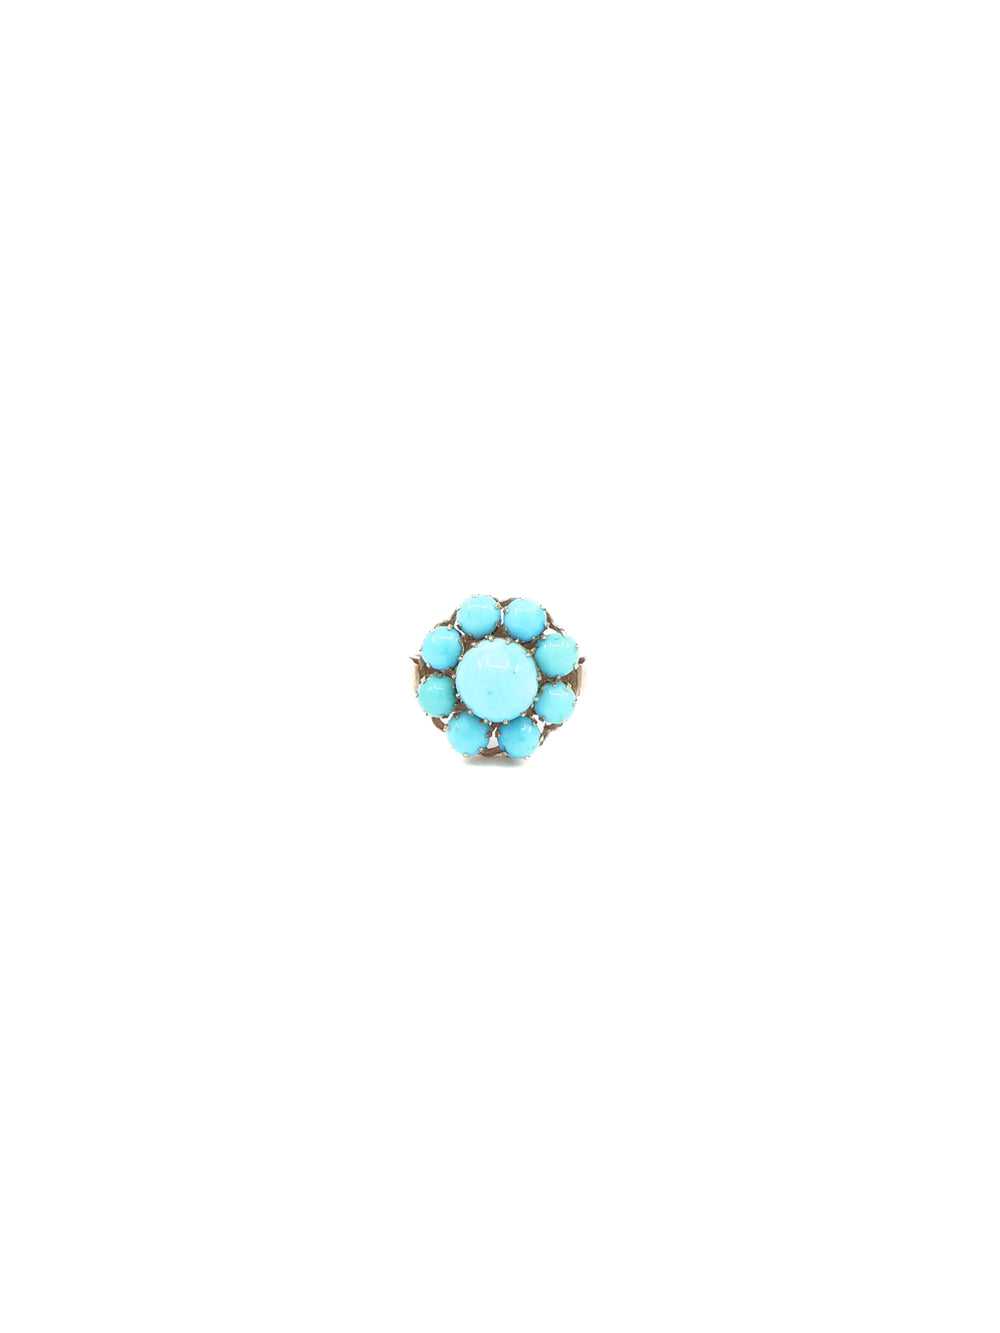 14K Turquoise Floral Cabochon Ring - image 2